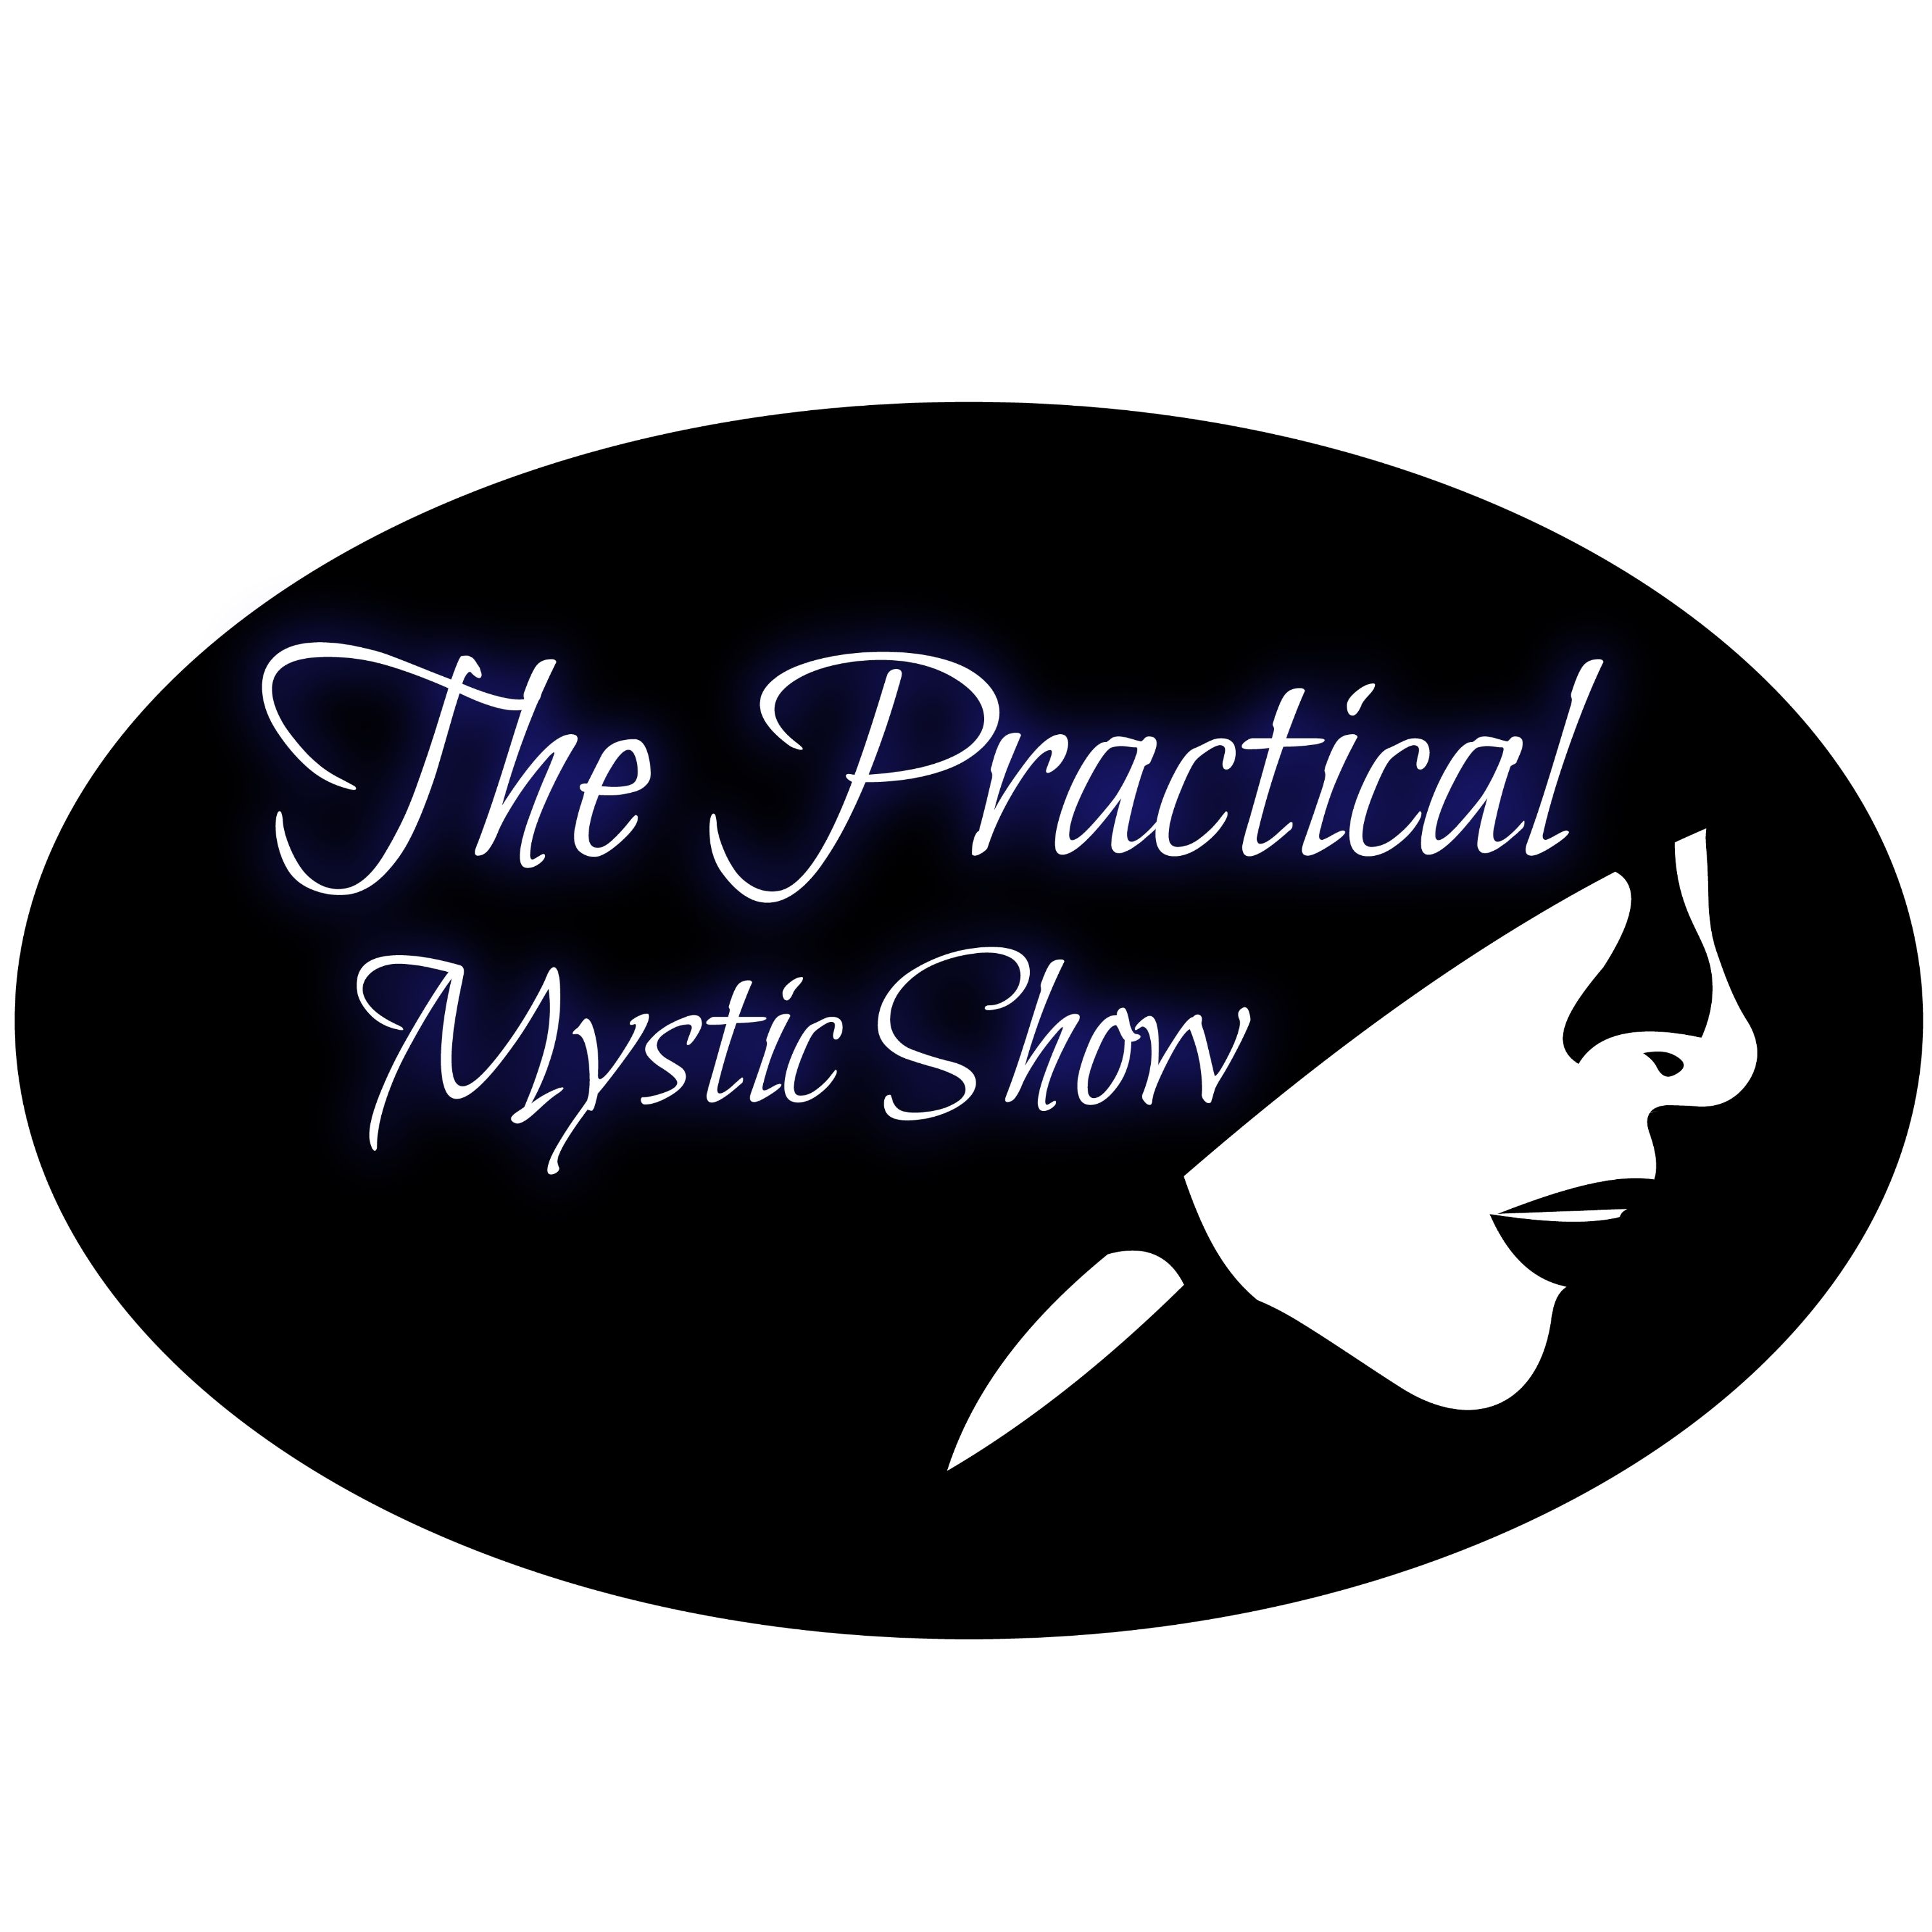 The Practical Mystic Show - with Janine Bolon